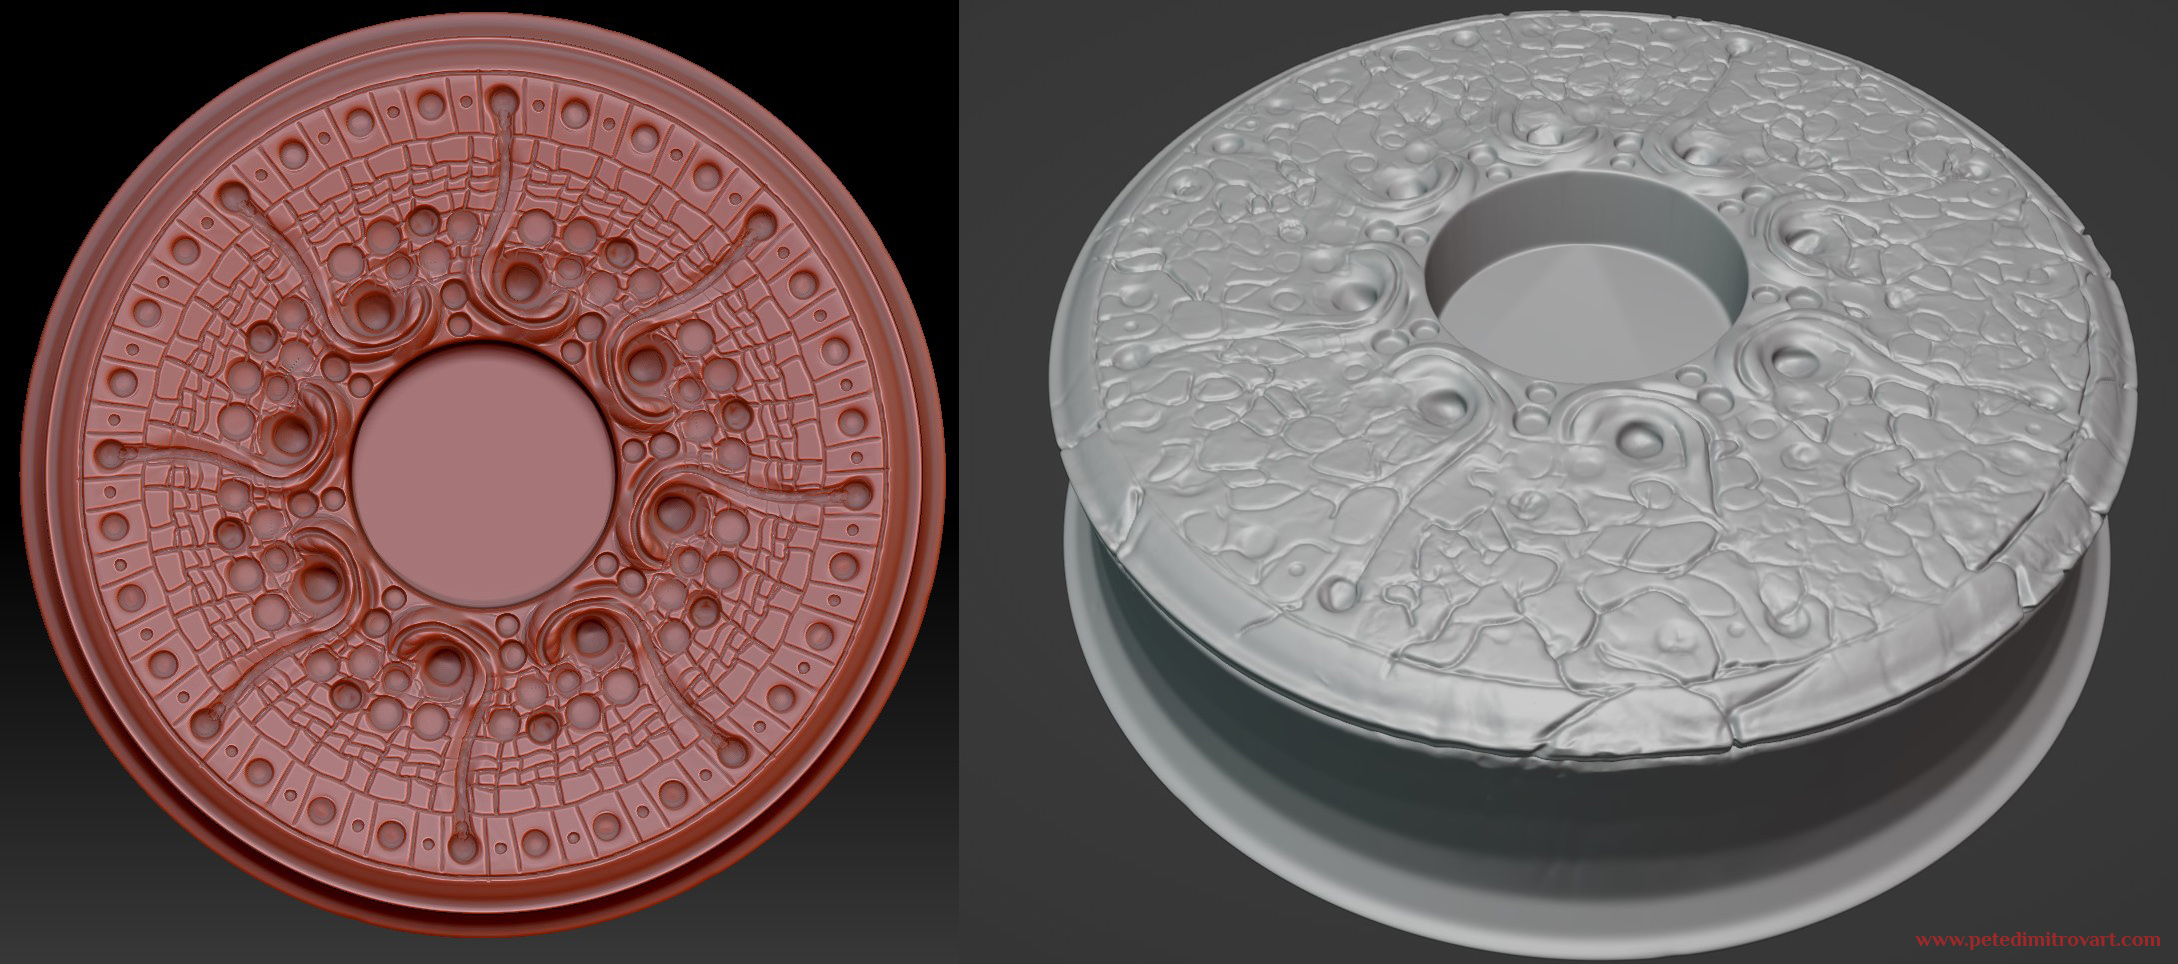 Zbrush red matcap screenshot showing the circular platform now sculpted on top. It has brick-like details but also lots of swirling circle motives that give it a sci-fi, alien look.